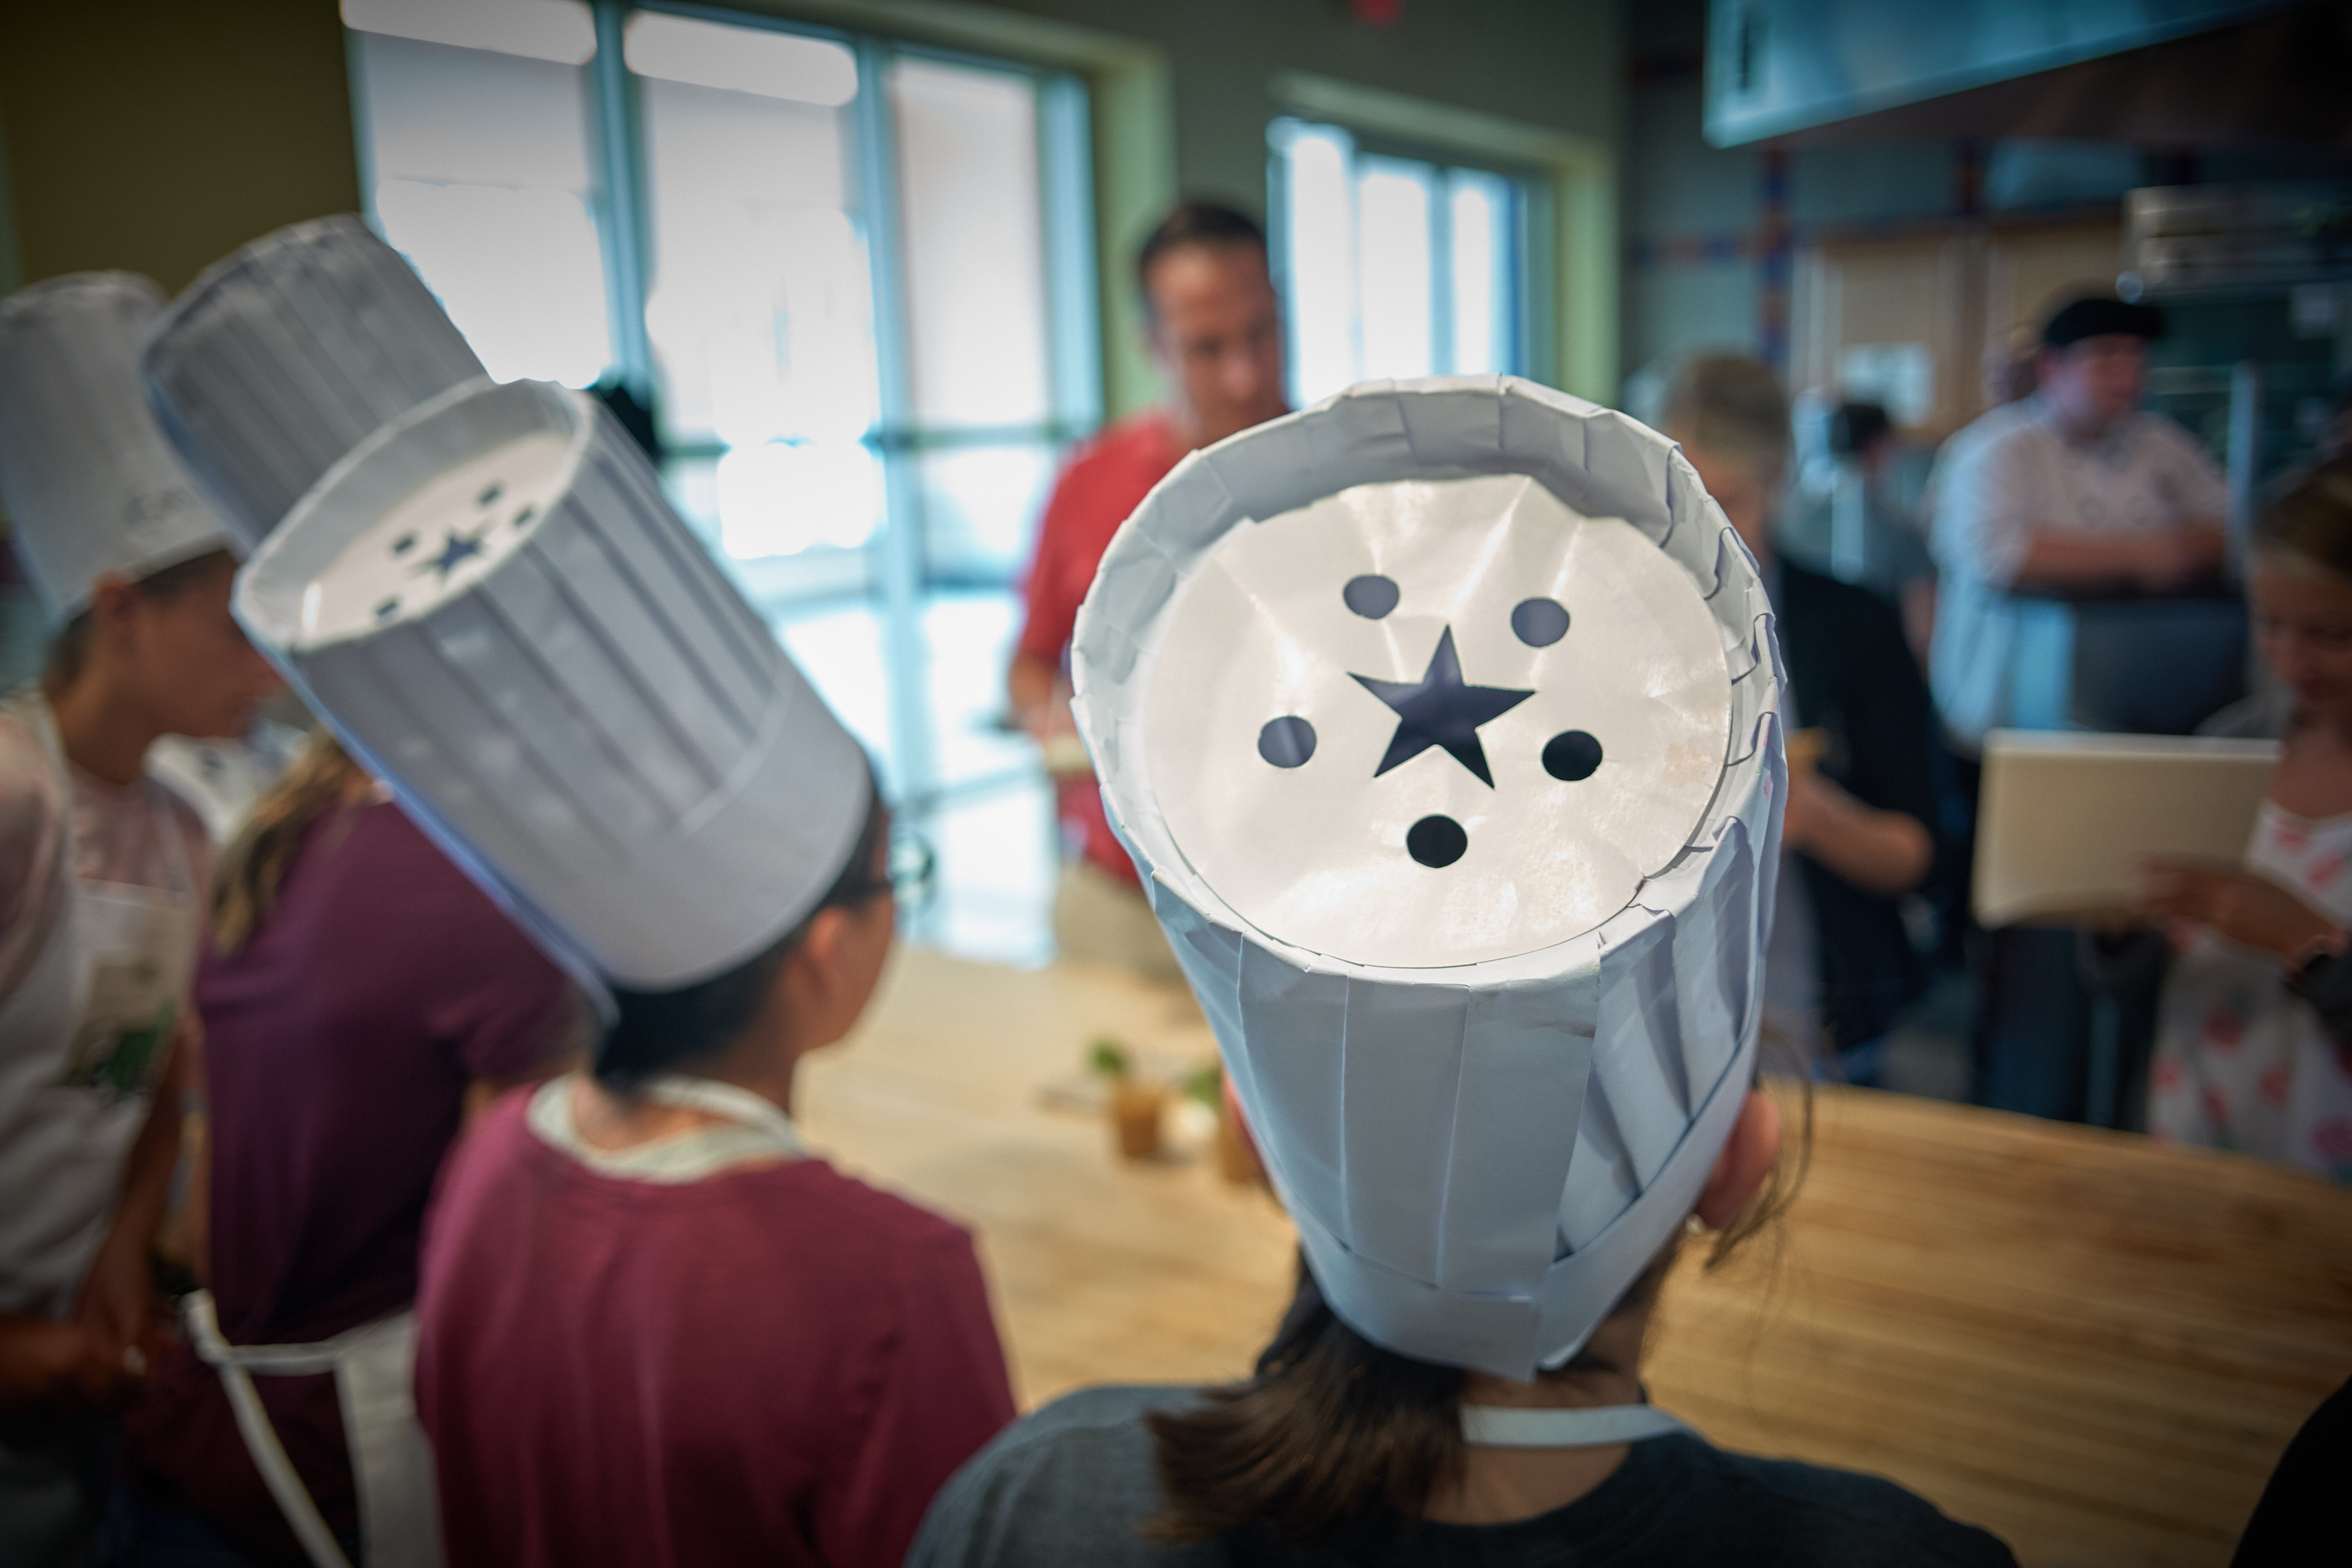 Campers wore aprons and chefs hats during the UCann Cook Camp at Gelfenbien Commons on July 18, 2019. (Peter Morenus/UConn Photo)